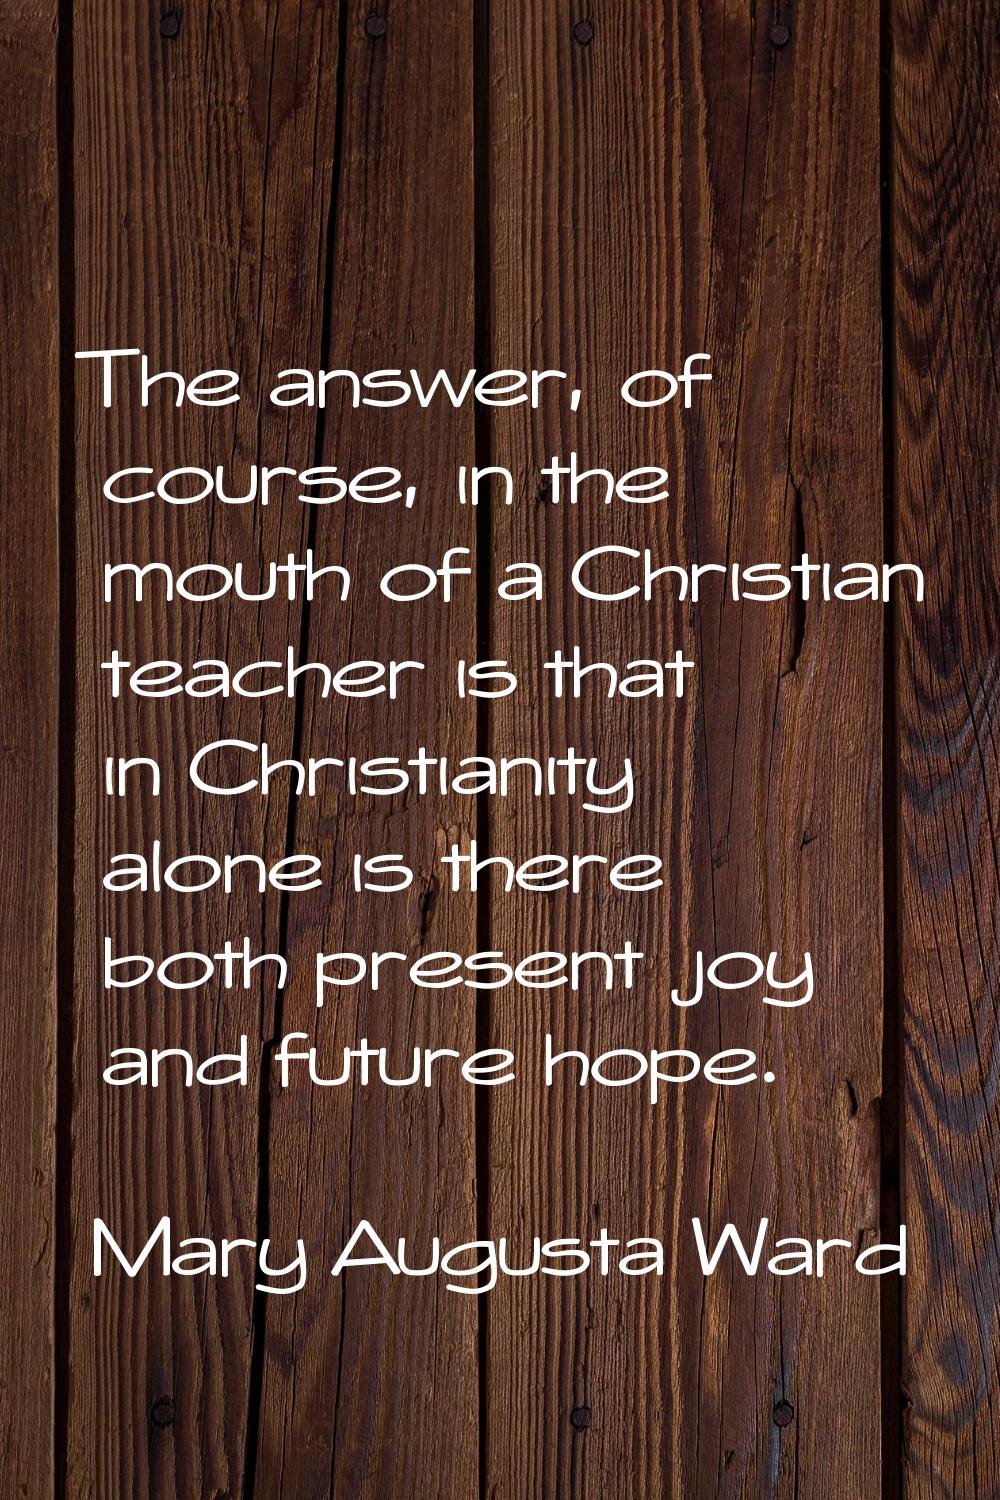 The answer, of course, in the mouth of a Christian teacher is that in Christianity alone is there b